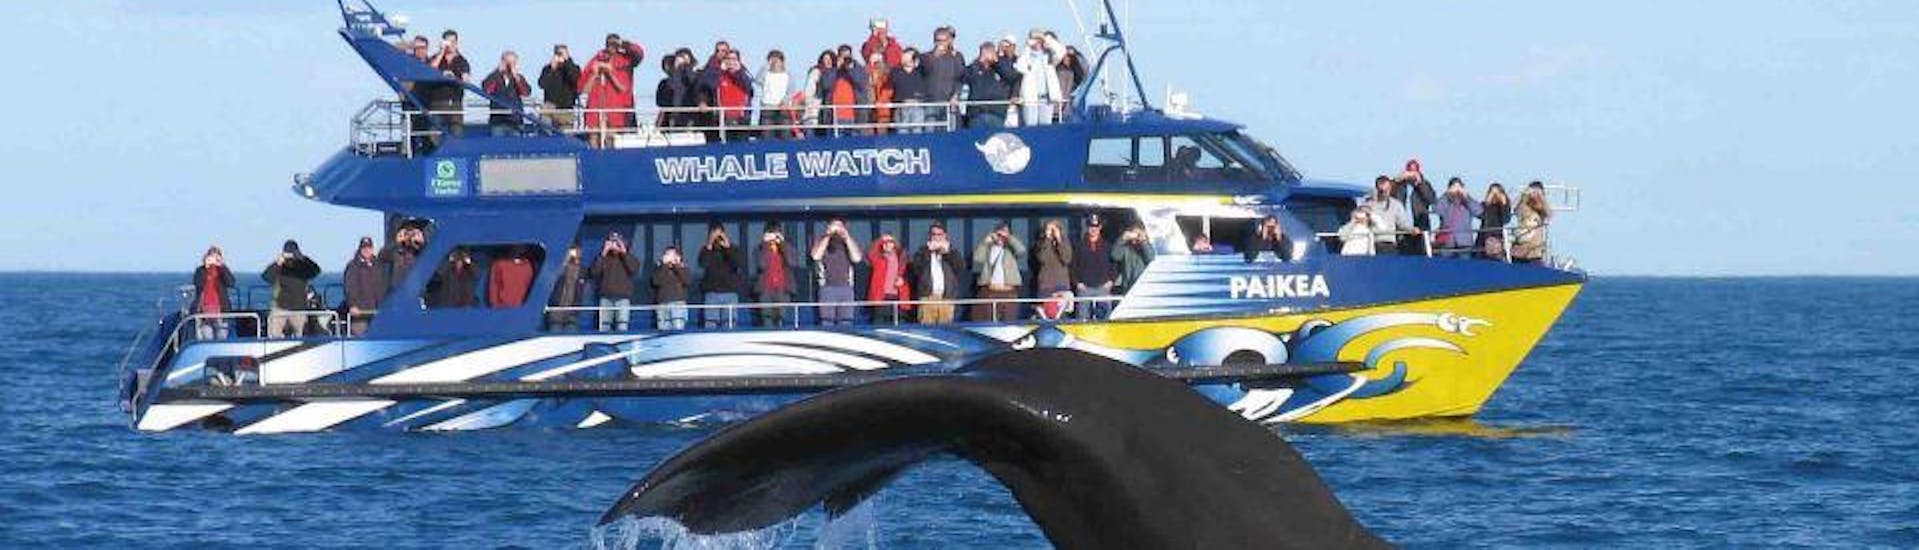 Whale Watching from Cape Town with Shark Zone Cape Town - Hero image